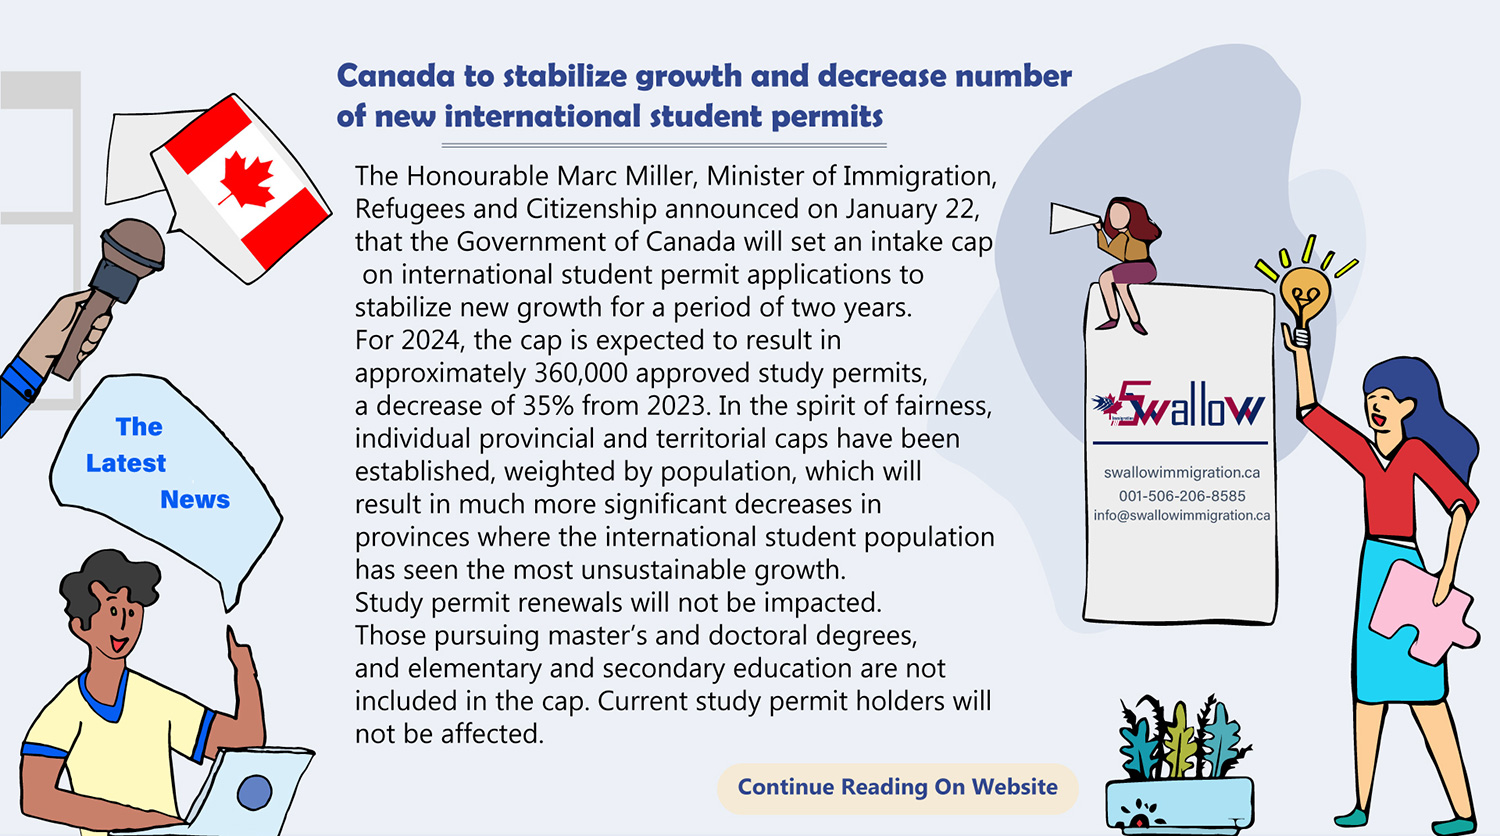 Canada to stabilize growth and decrease number of new international student permits